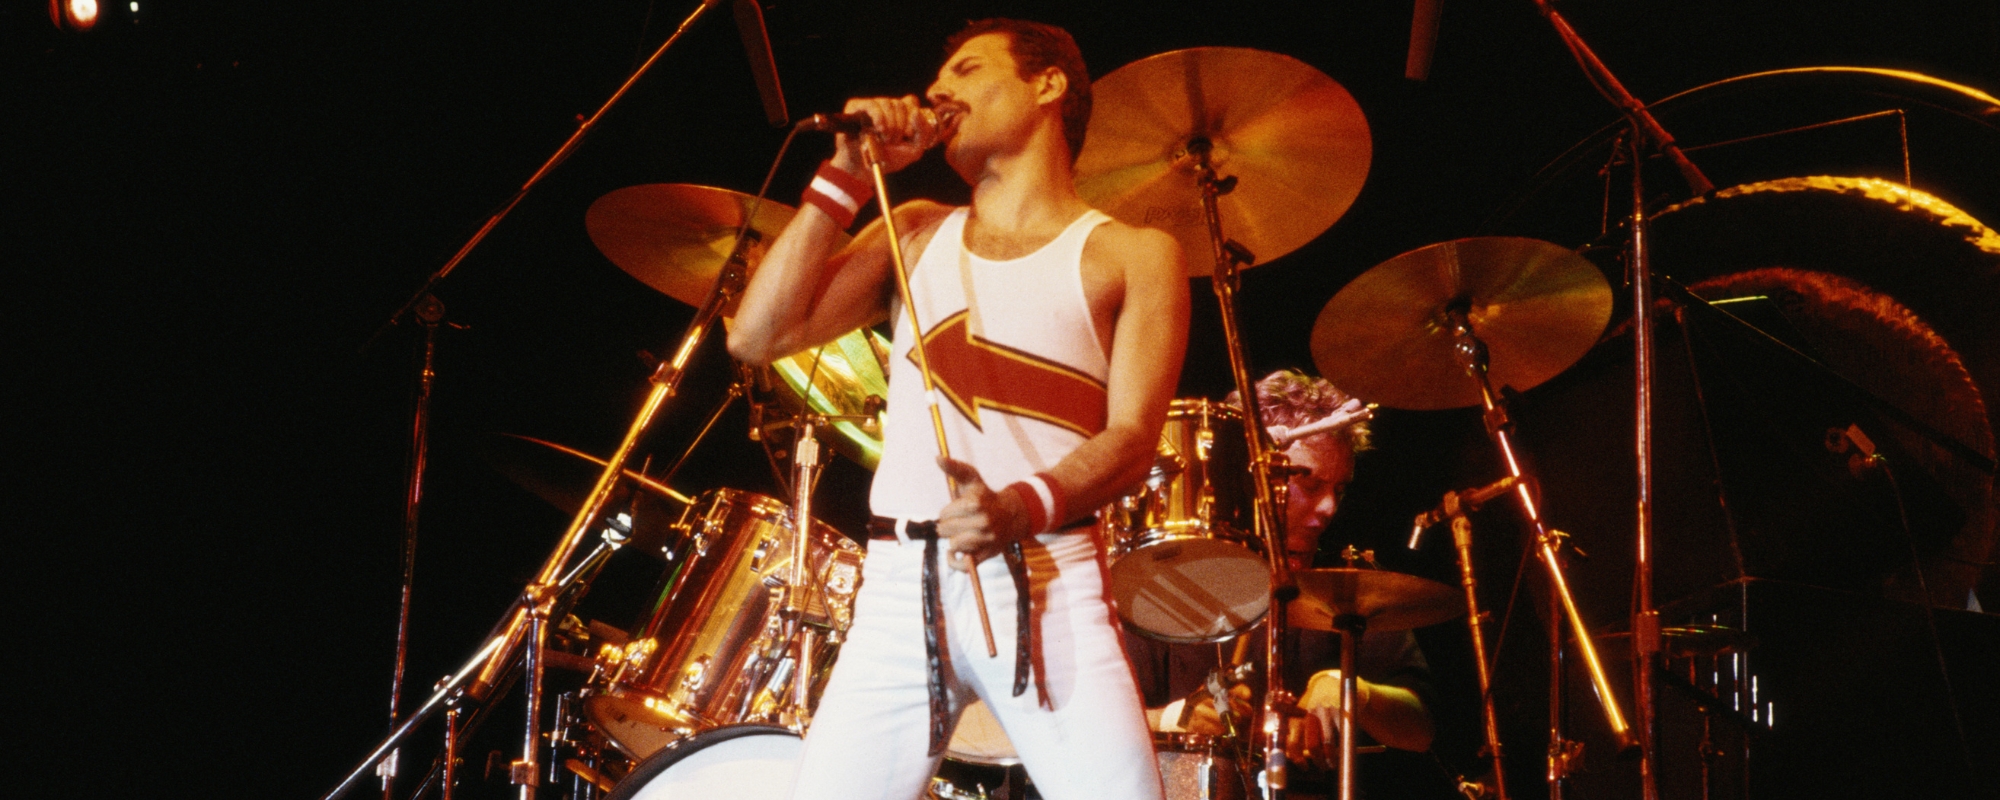 Fans Pay Tribute to Late Queen Frontman Freddie Mercury on the 32nd Anniversary of His Death